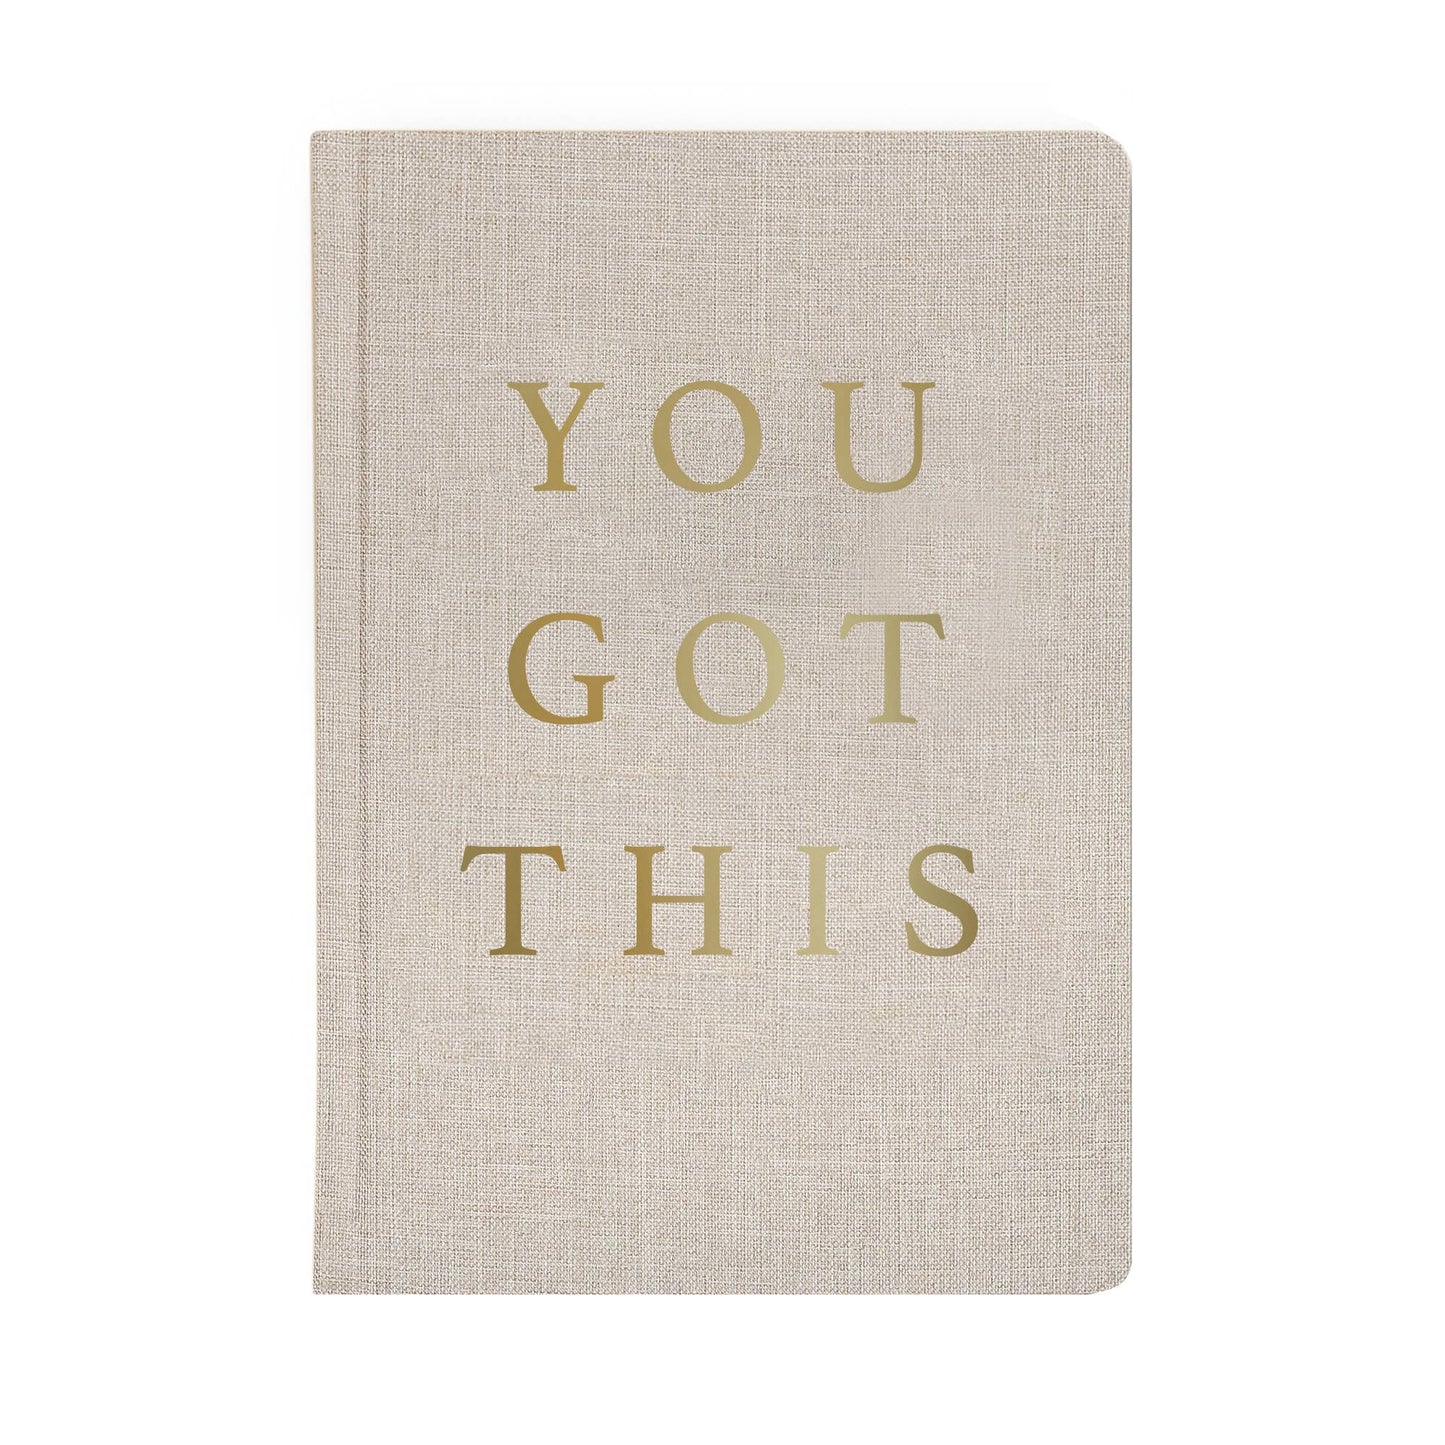 Sweet Water Decor - You Got This Fabric Journal